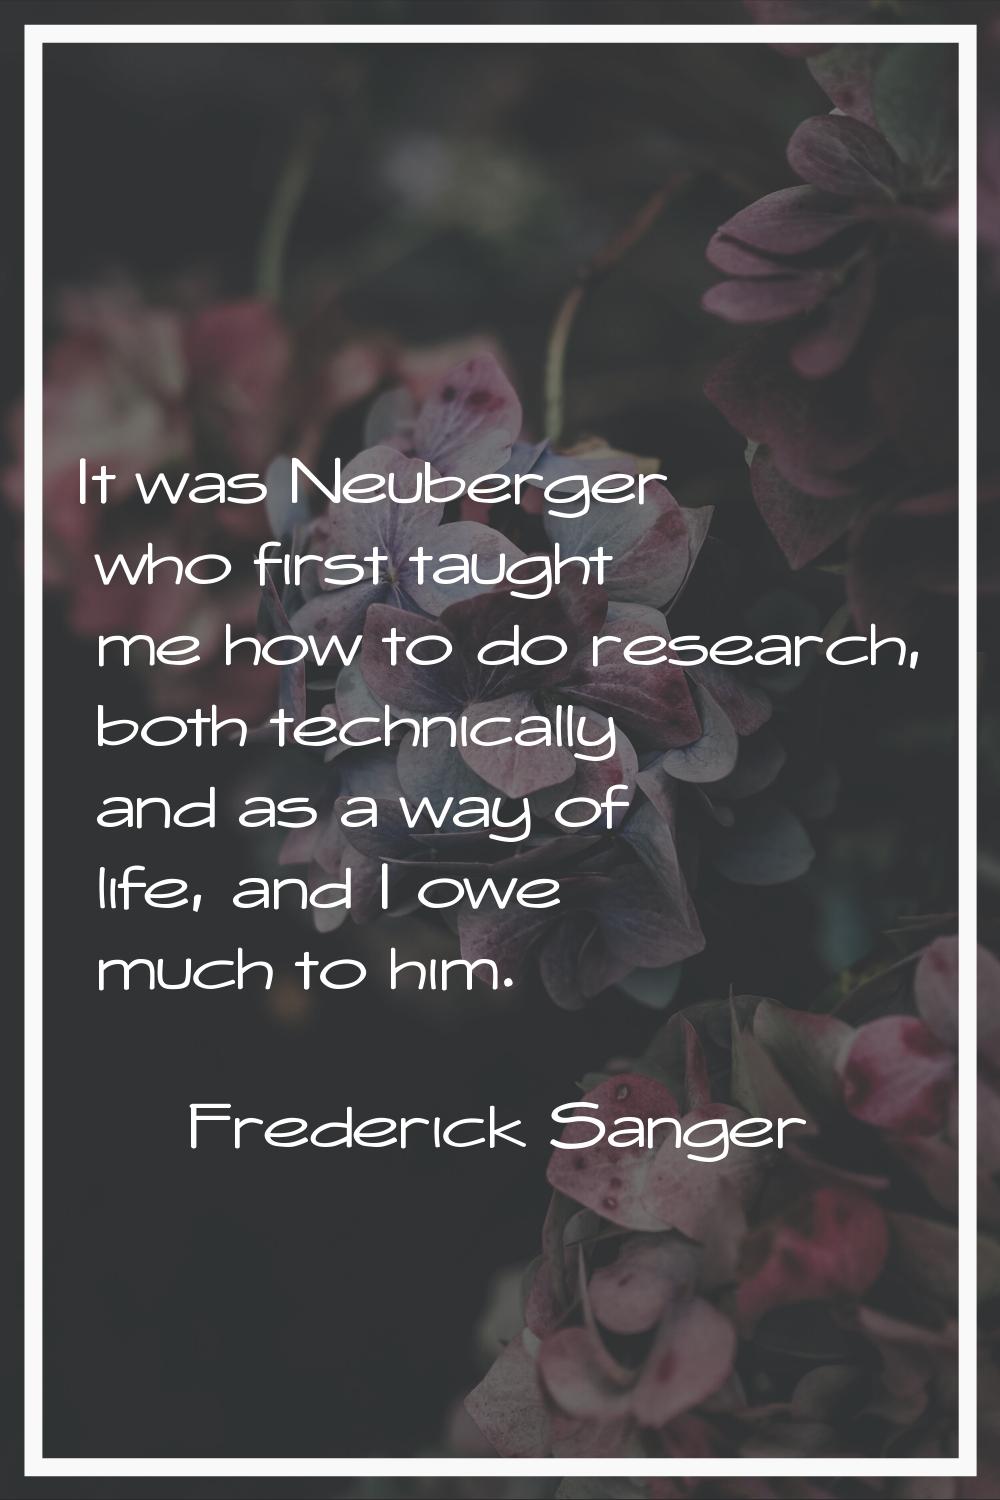 It was Neuberger who first taught me how to do research, both technically and as a way of life, and